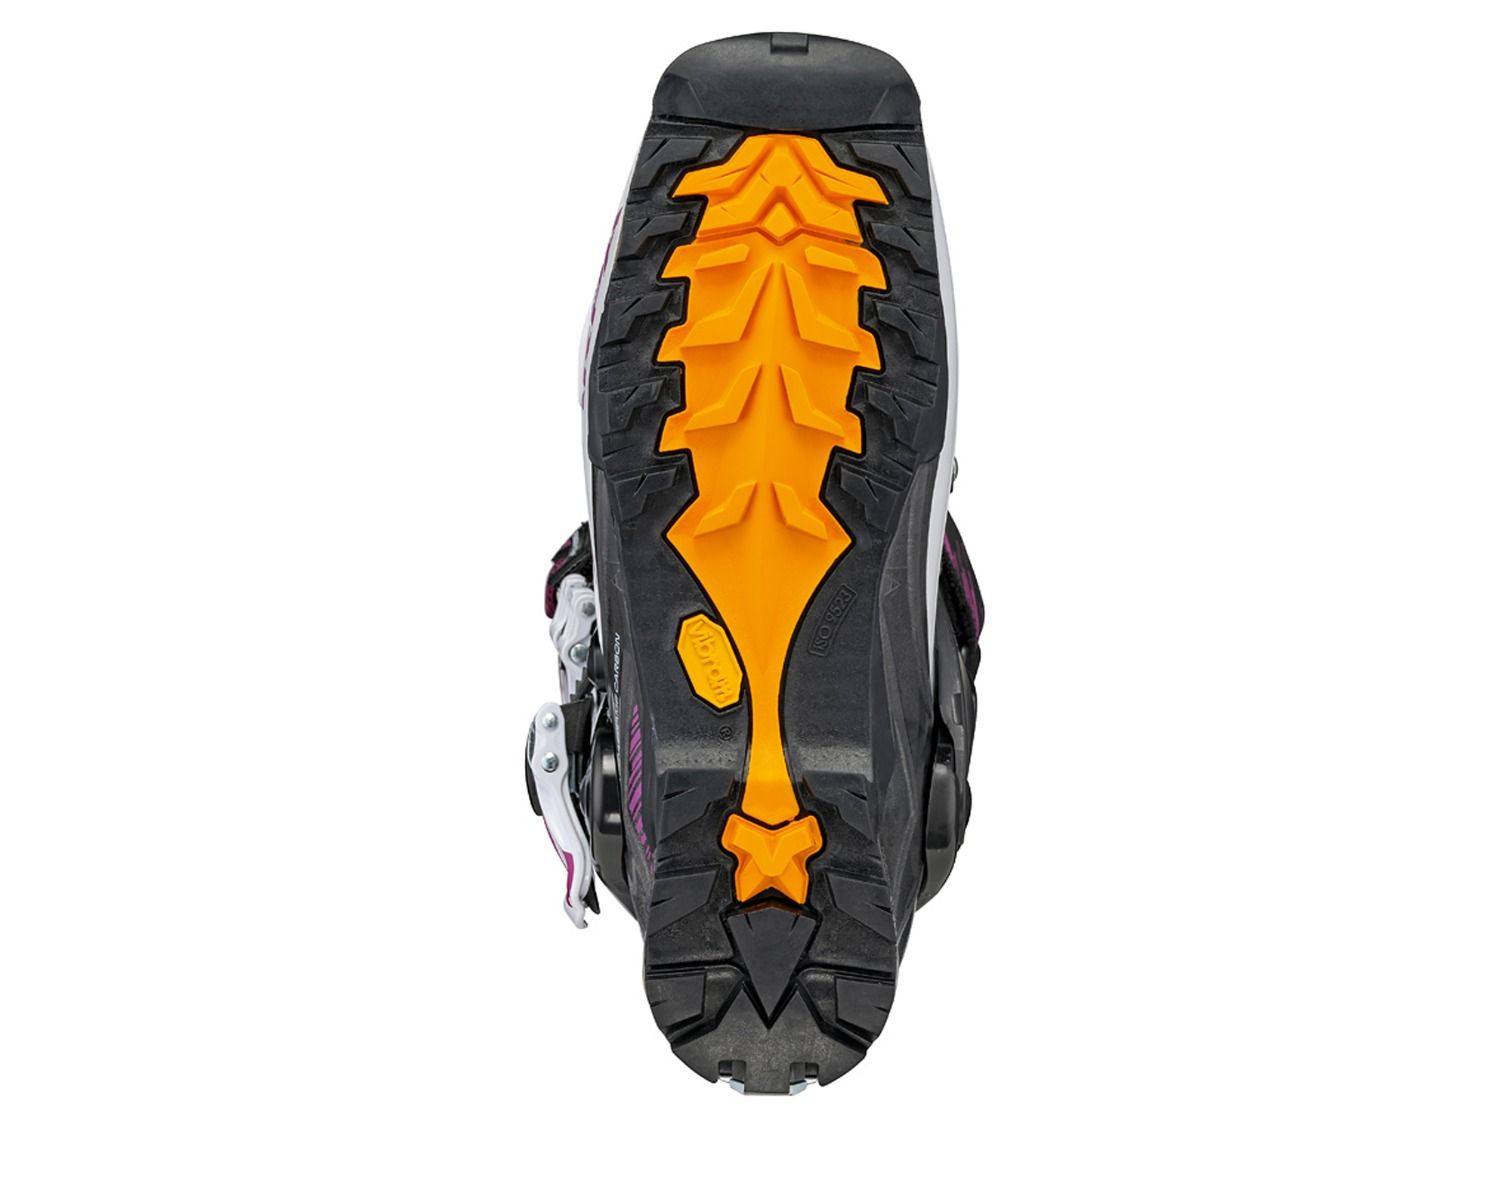 vibram sole of the scarpa gea rs womens ski boots